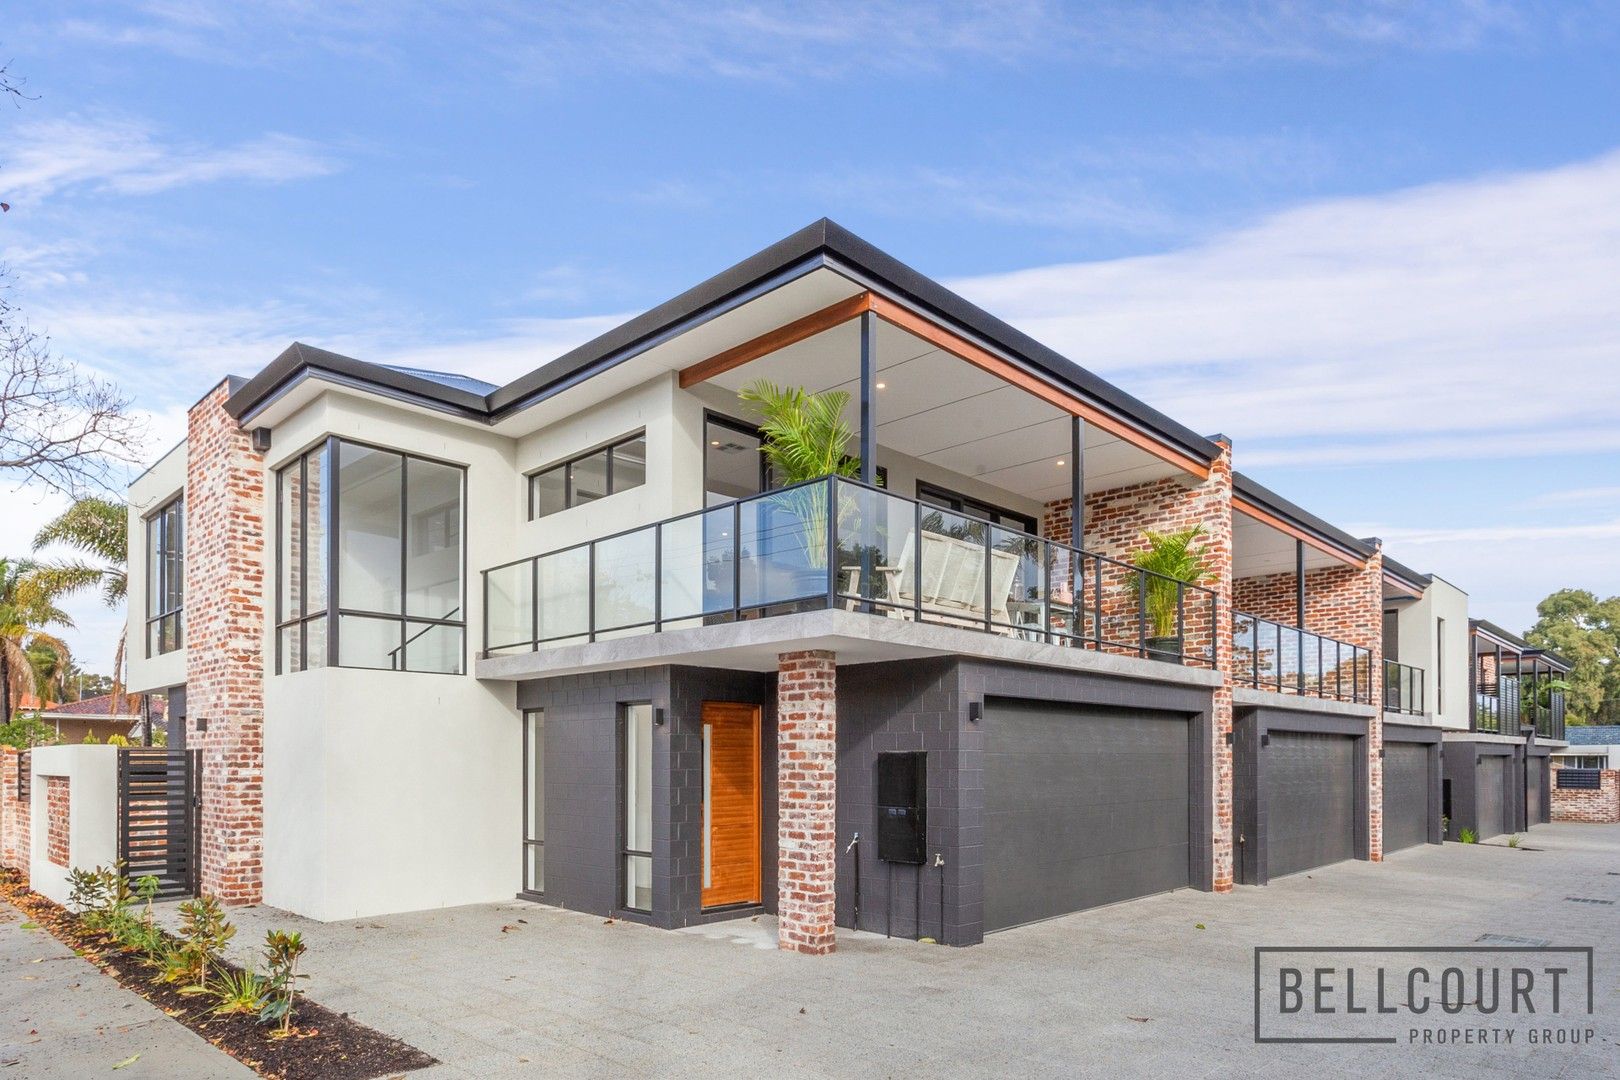 3 bedrooms Townhouse in 4/233 Charles Street NORTH PERTH WA, 6006